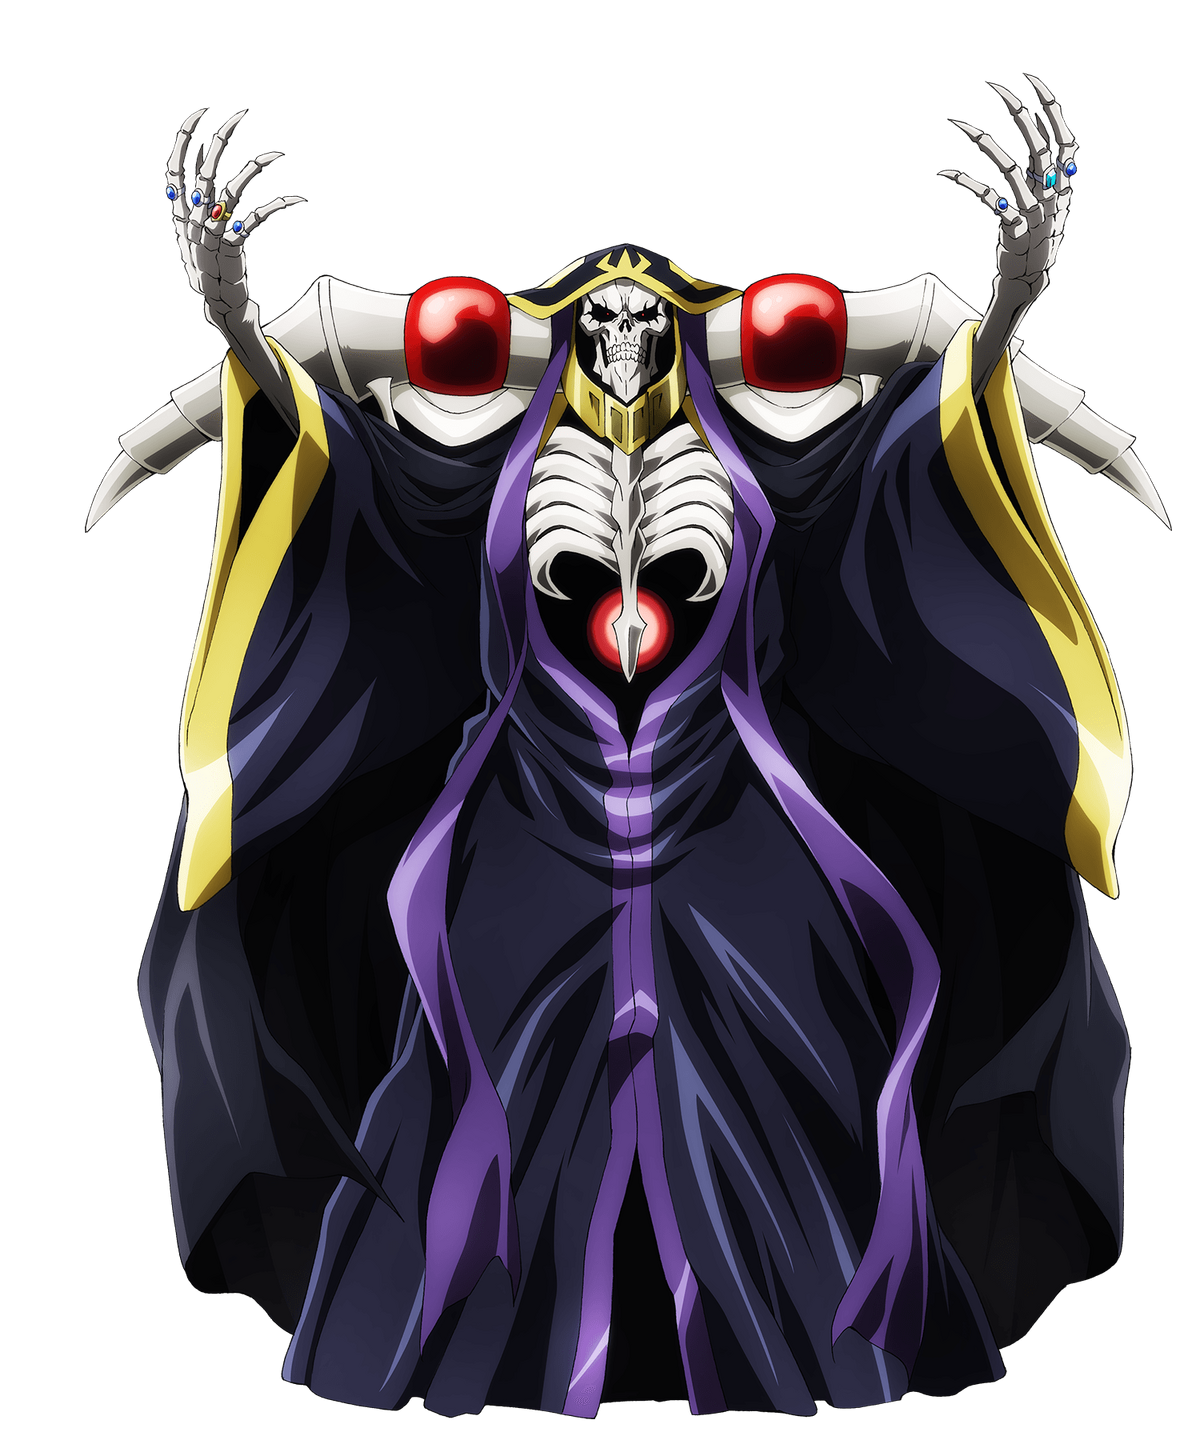 Category:Characters, Overlord Wiki